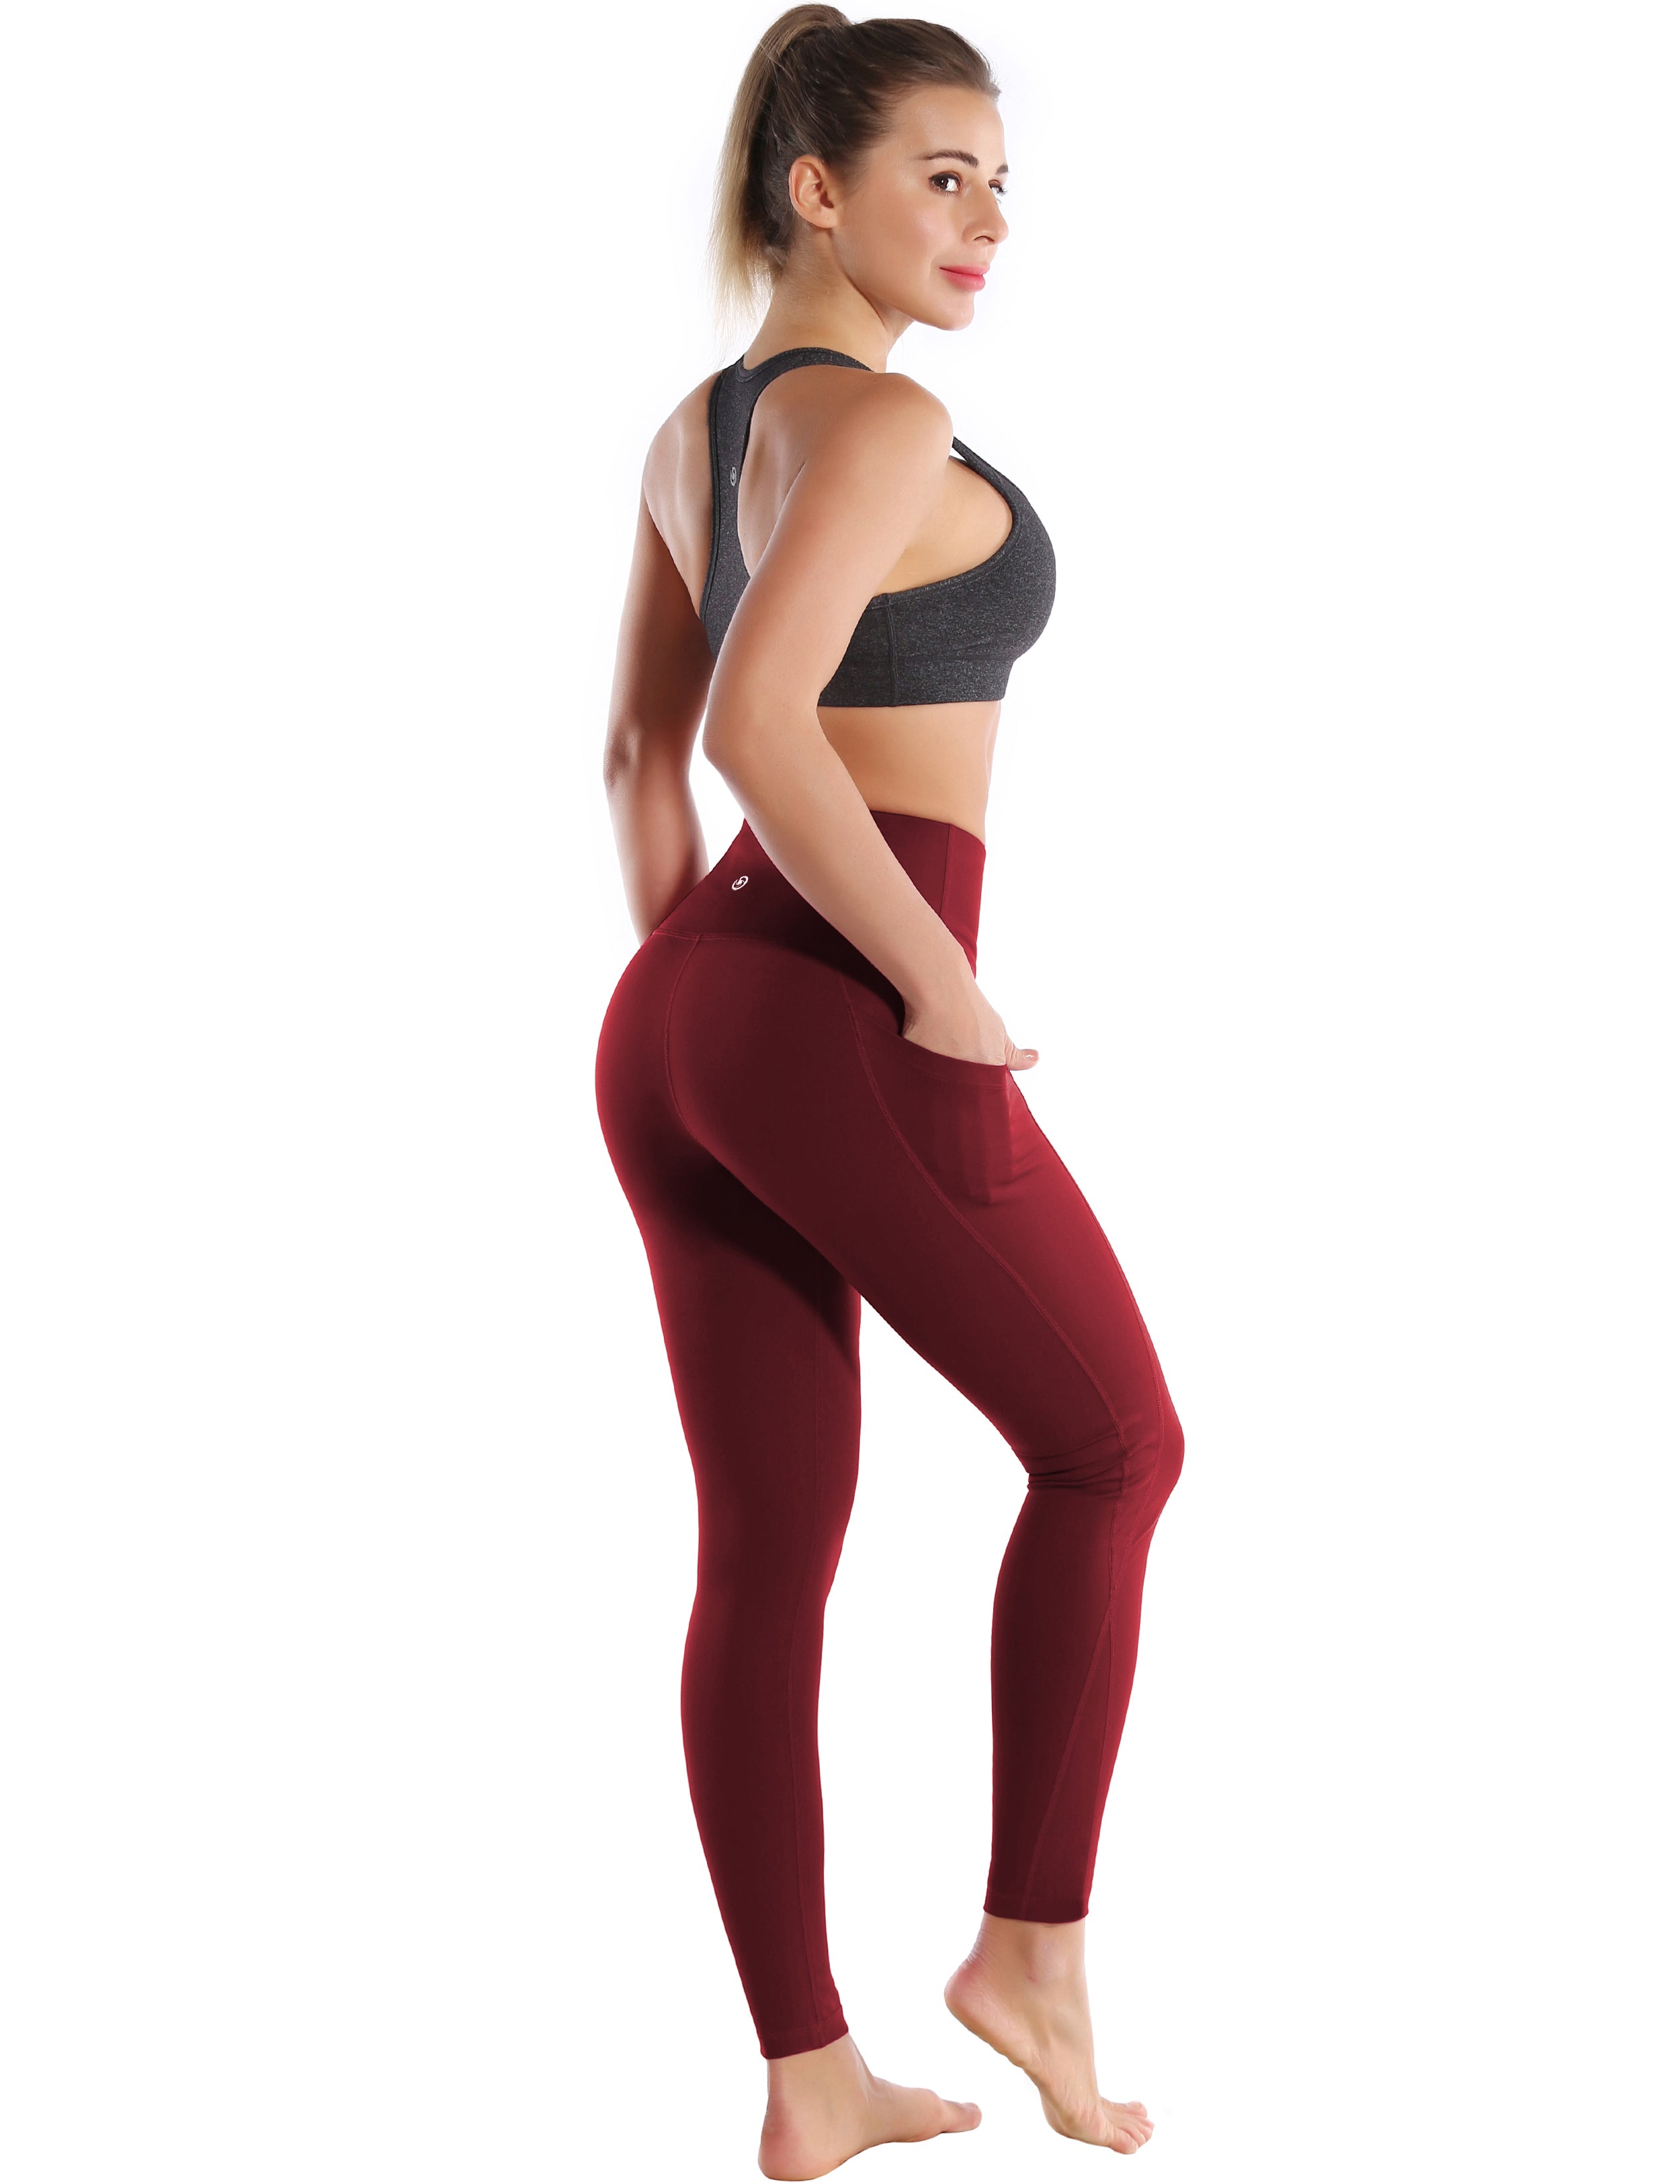 High Waist Side Pockets Yoga Pants cherryred 75% Nylon, 25% Spandex Fabric doesn't attract lint easily 4-way stretch No see-through Moisture-wicking Tummy control Inner pocket